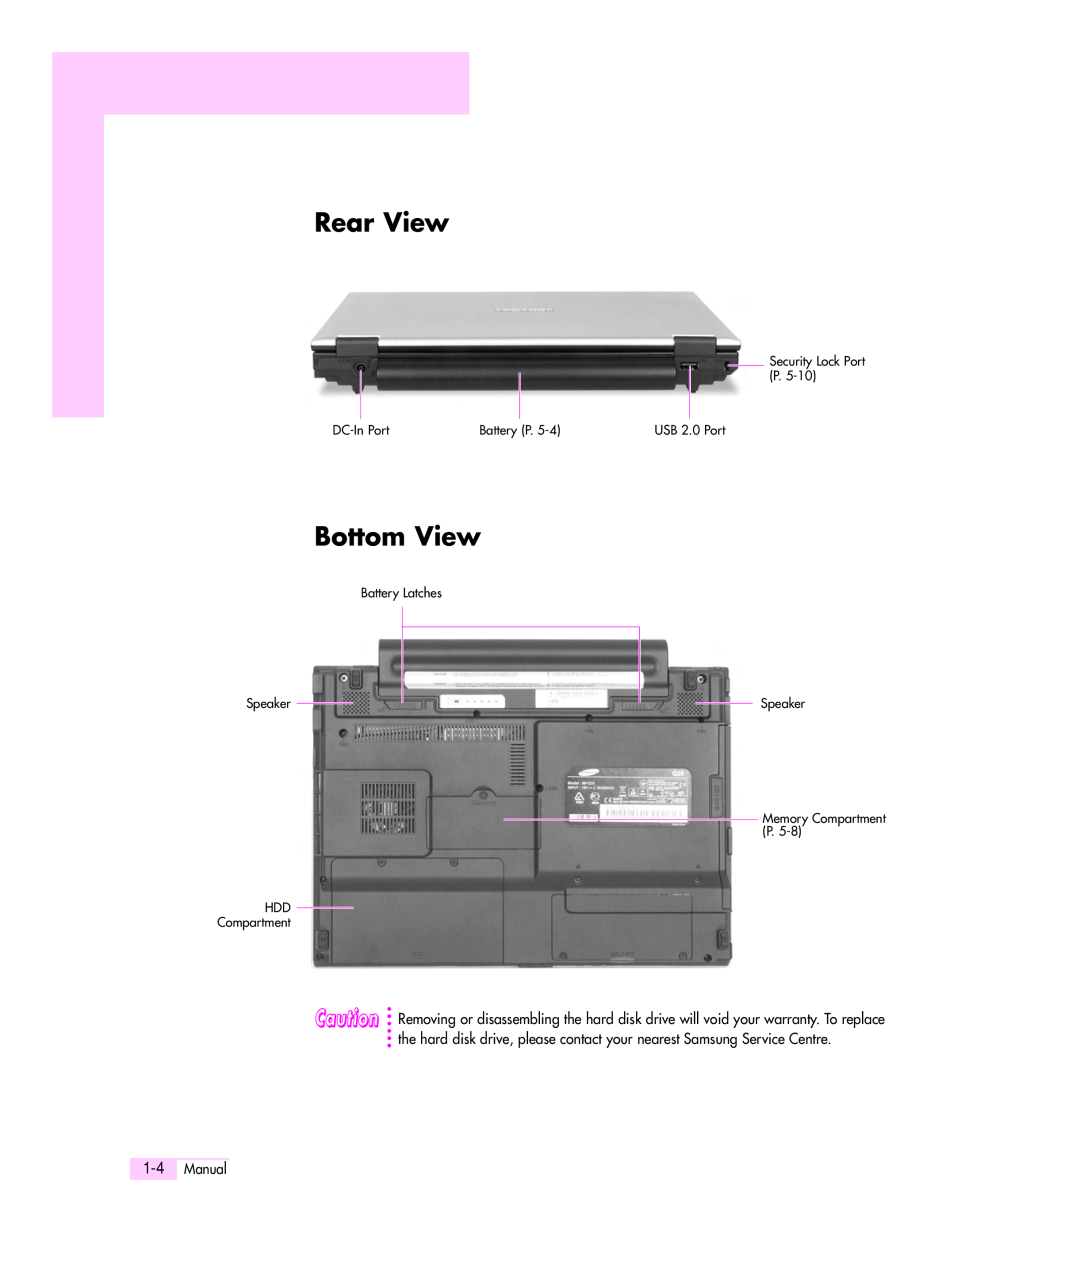 Samsung Q35 manual Rear View, Bottom View, DC-In Port, Battery Latches Speaker HDD Compartment, Battery P 